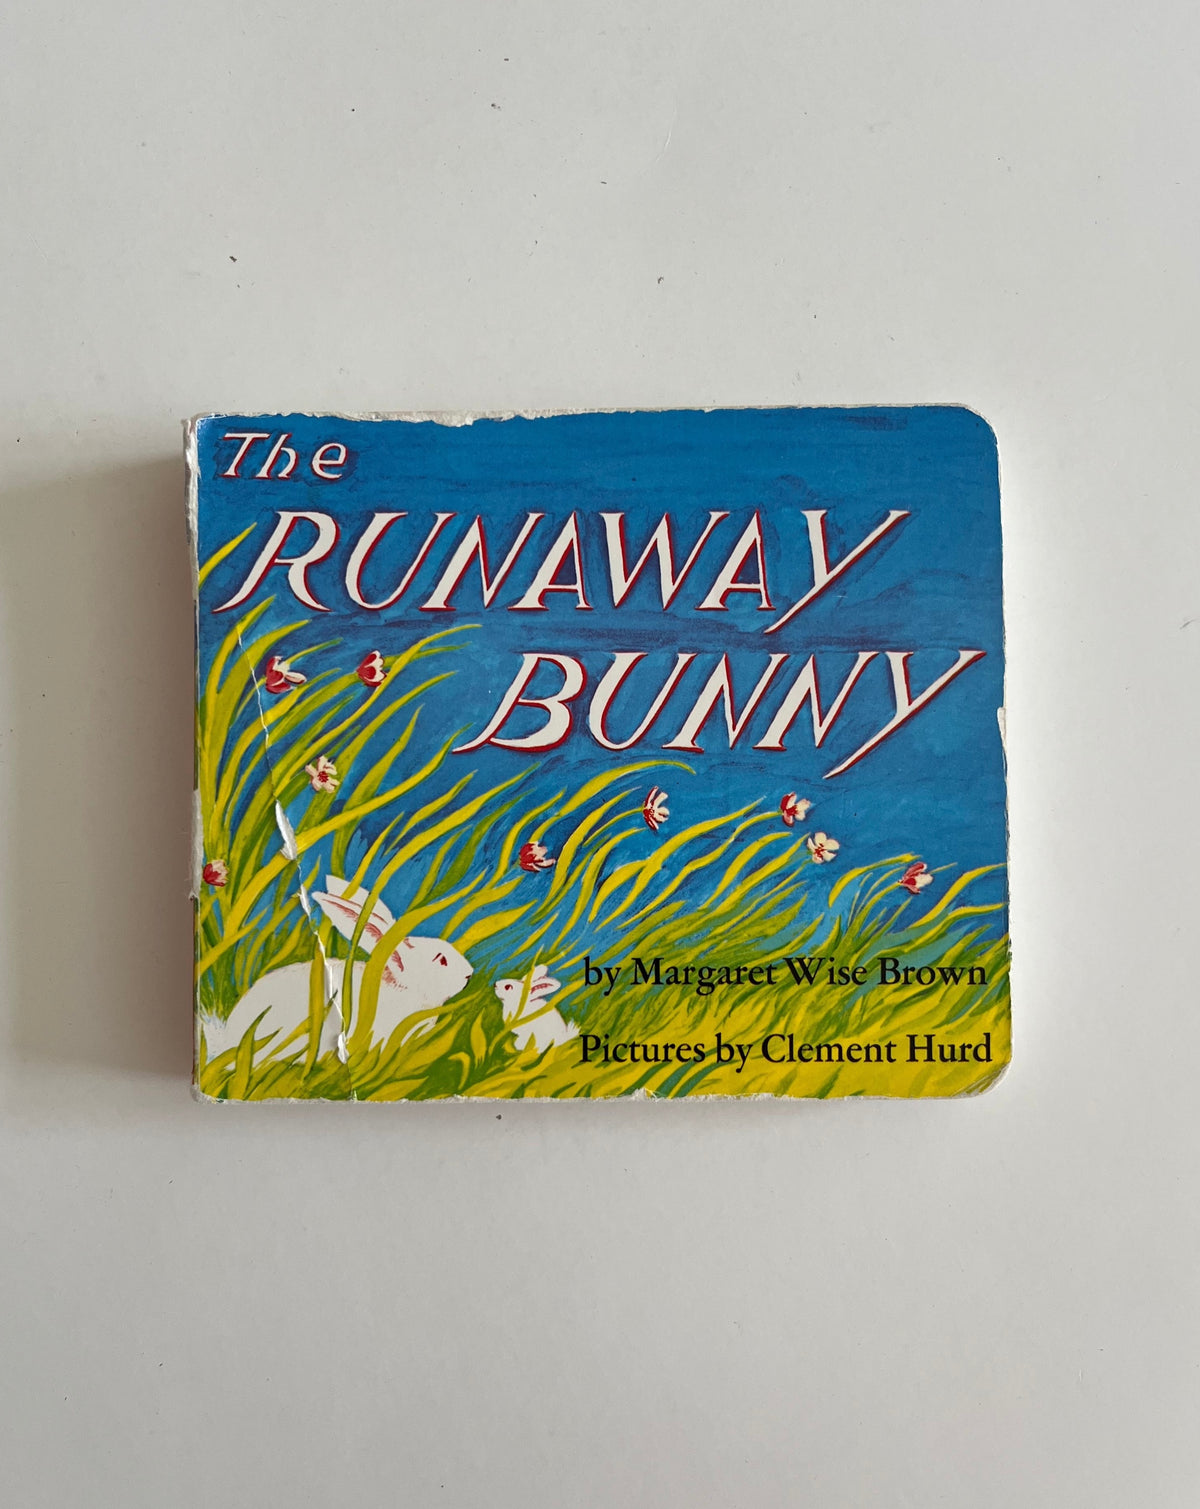 The Runaway Bunny by Margaret Wise Brown